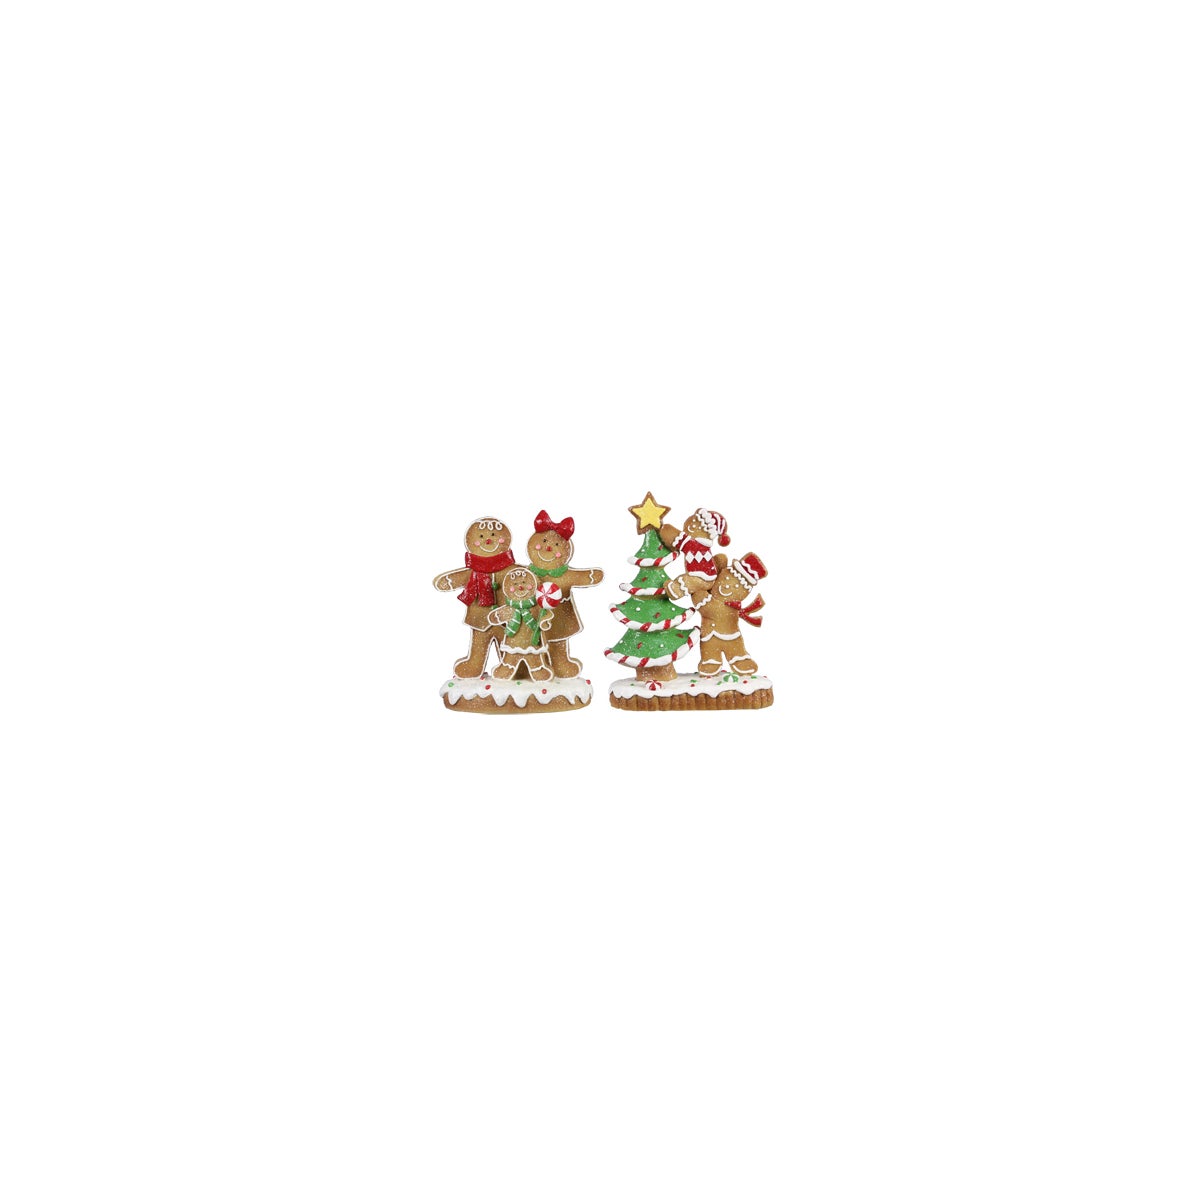 Resin Christmas Gingerbread Family, 2 Assorted